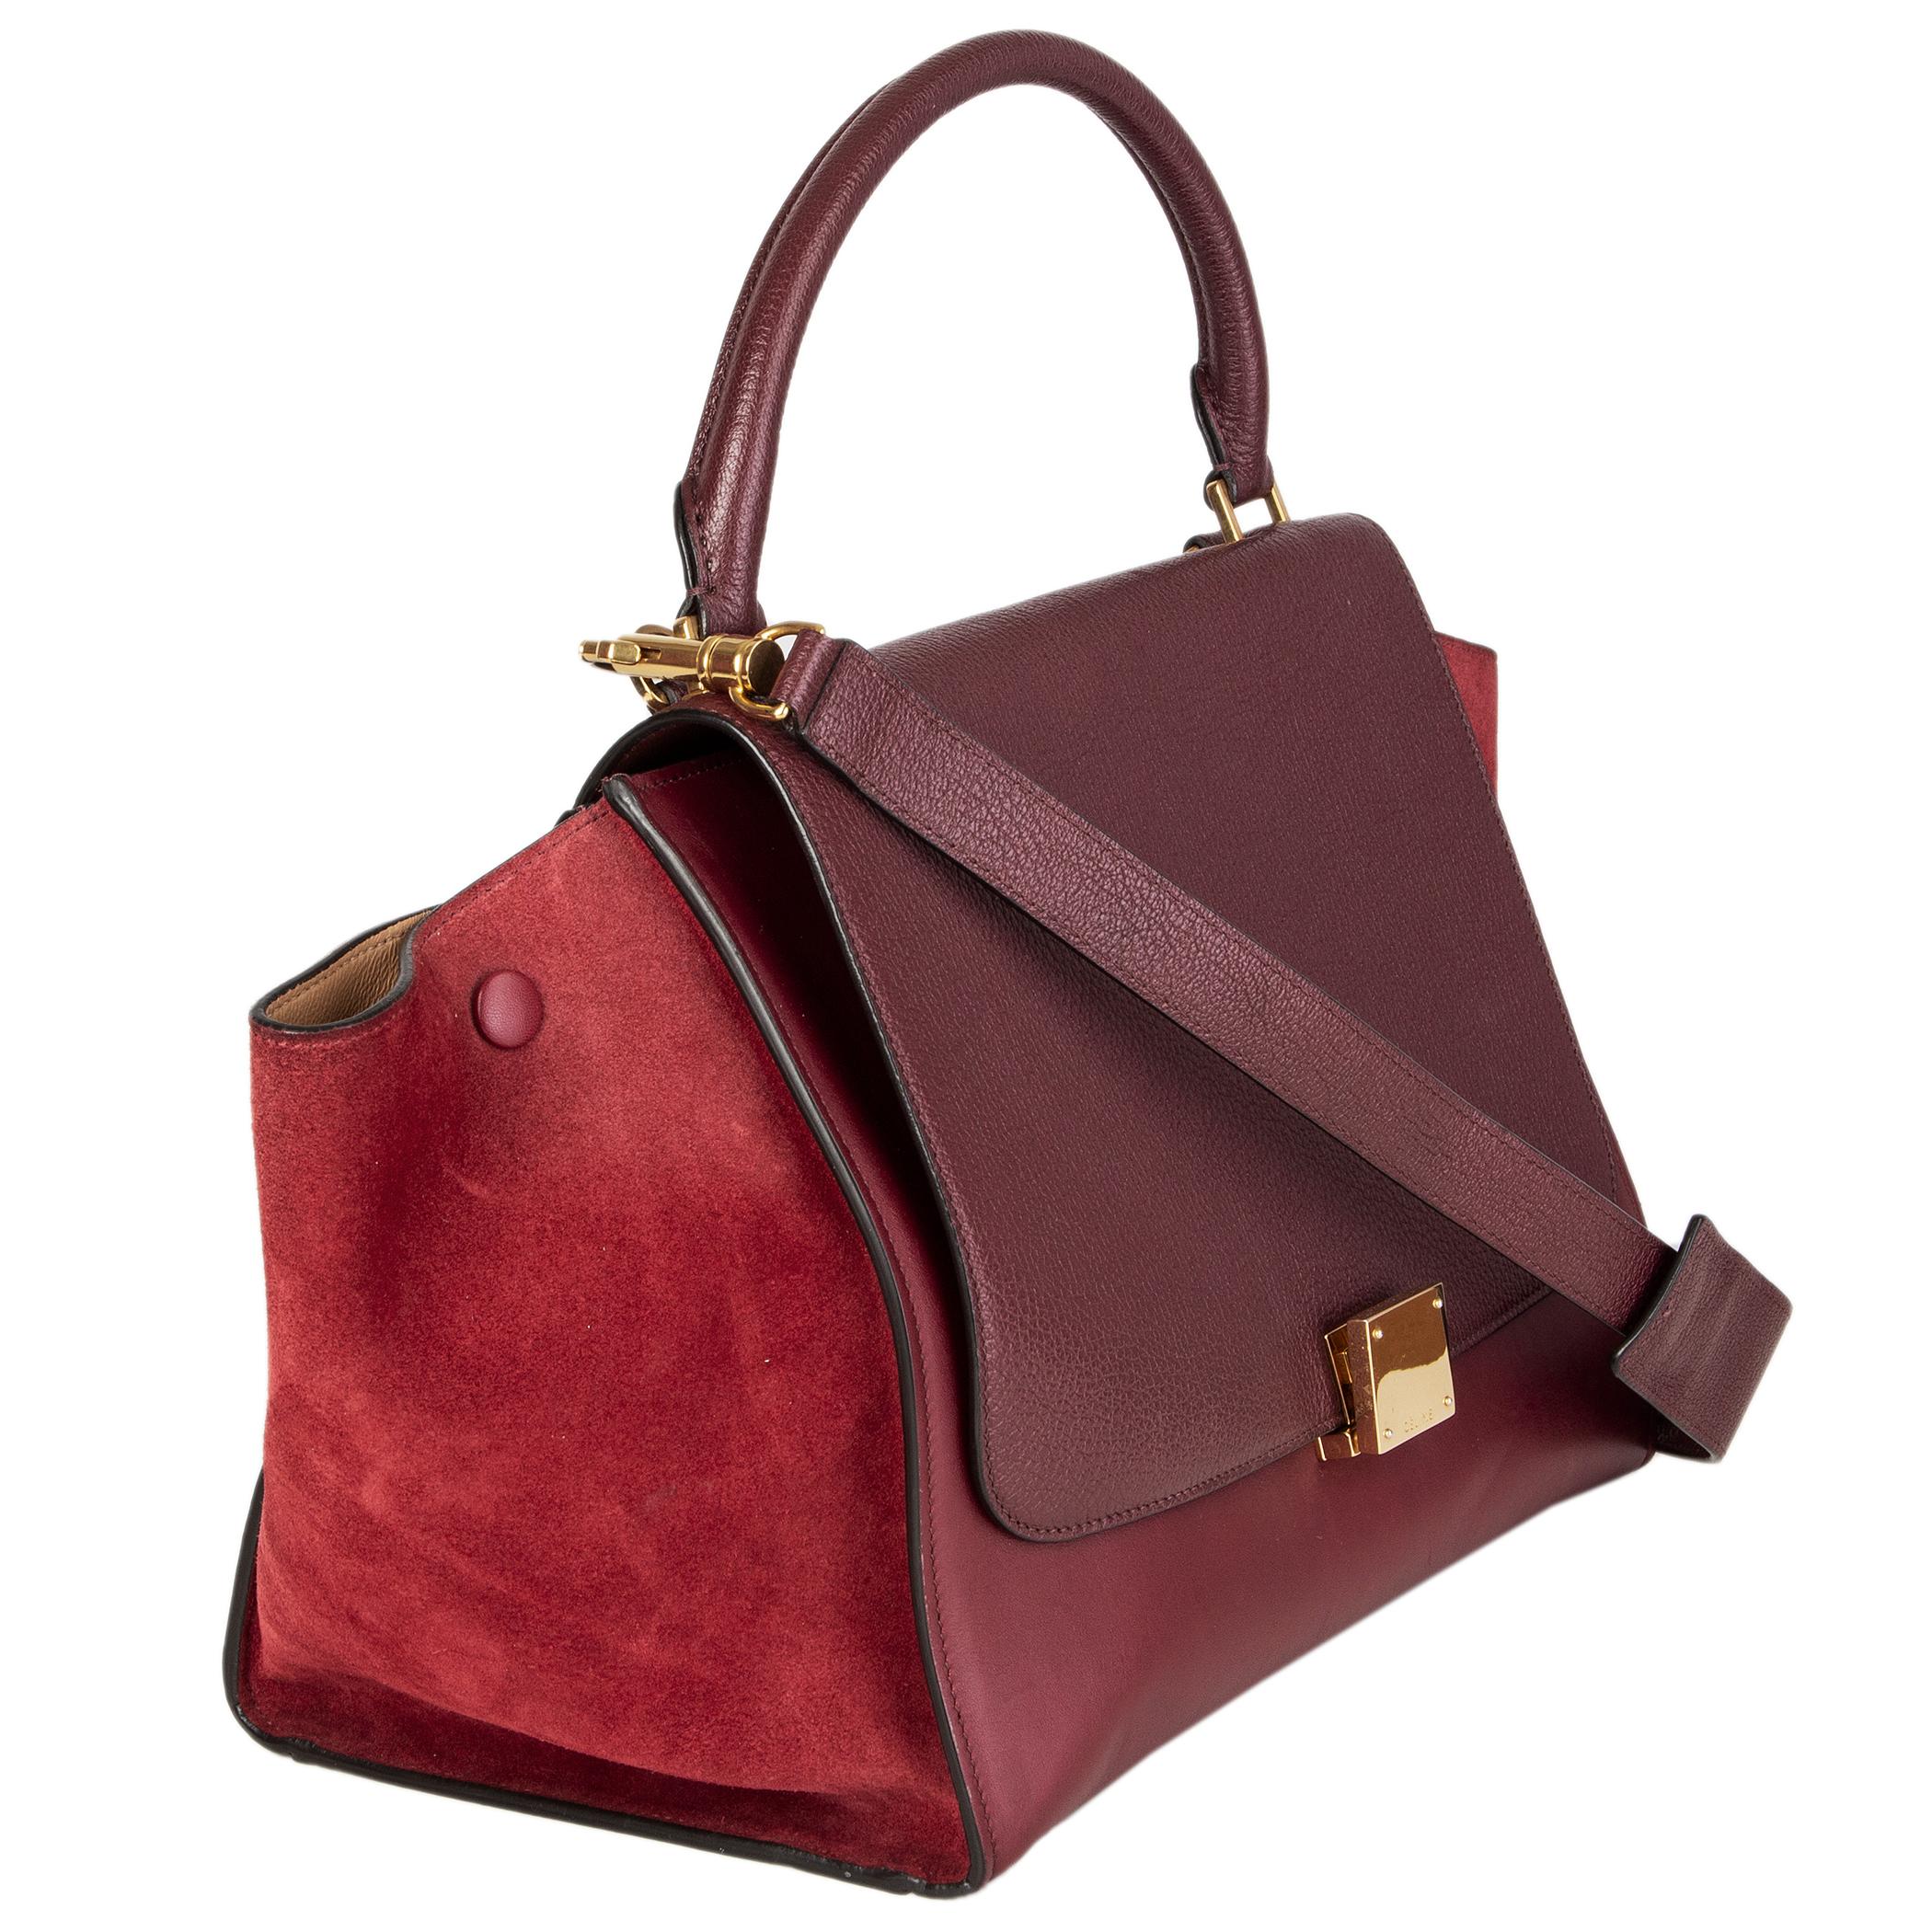 Celine 'Trapeze Small' shoulder bag in burgundy leather and suede with dark burgundy grained leather flap. Zipper pocket on the back. Detachbale shoulder strap. Clsoes with lock and zipper. Lined in beige leather with two open pockets against the